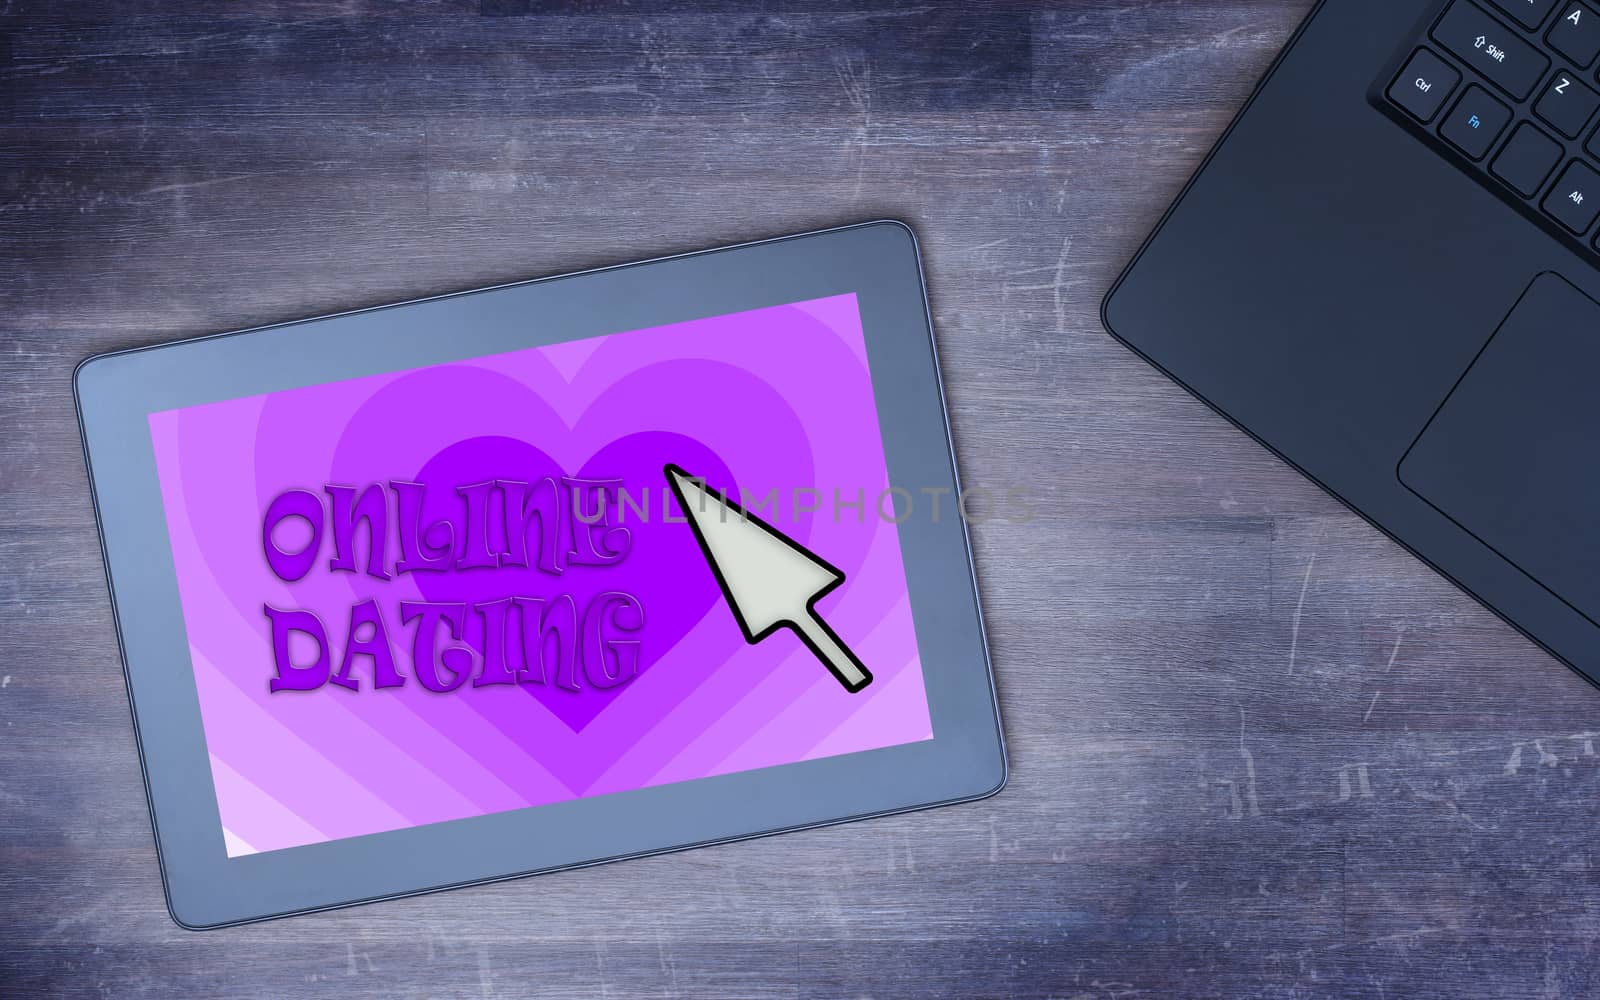 Online dating on a tablet by michaklootwijk